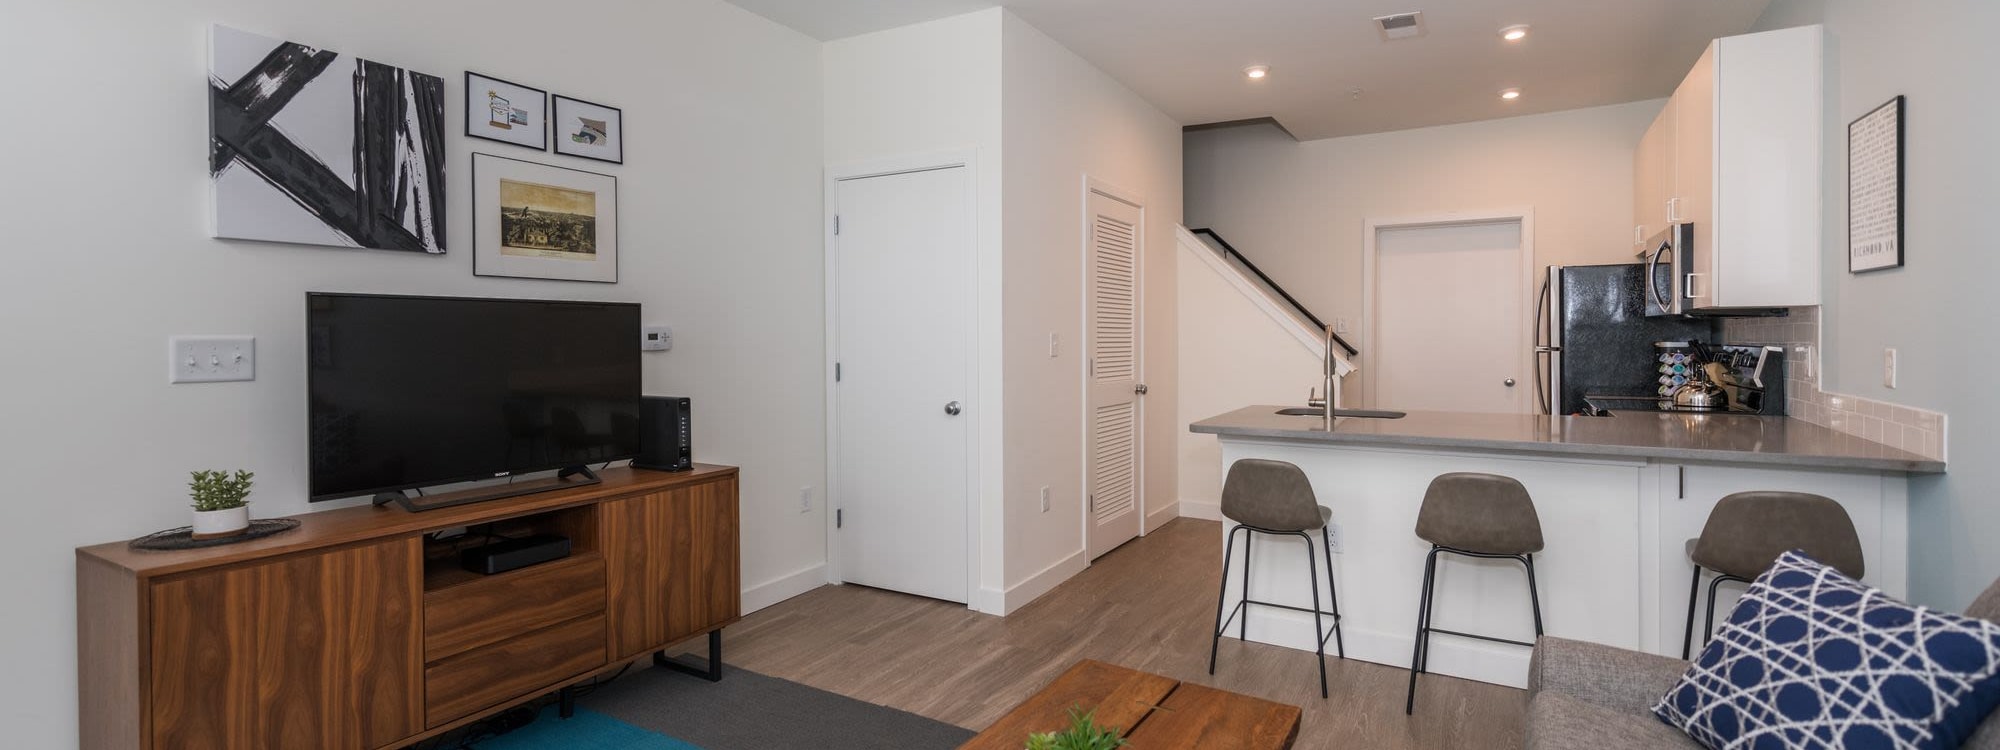 Spacious one bedroom apartment at SYMBOL Scott's Addition in Richmond, Virginia